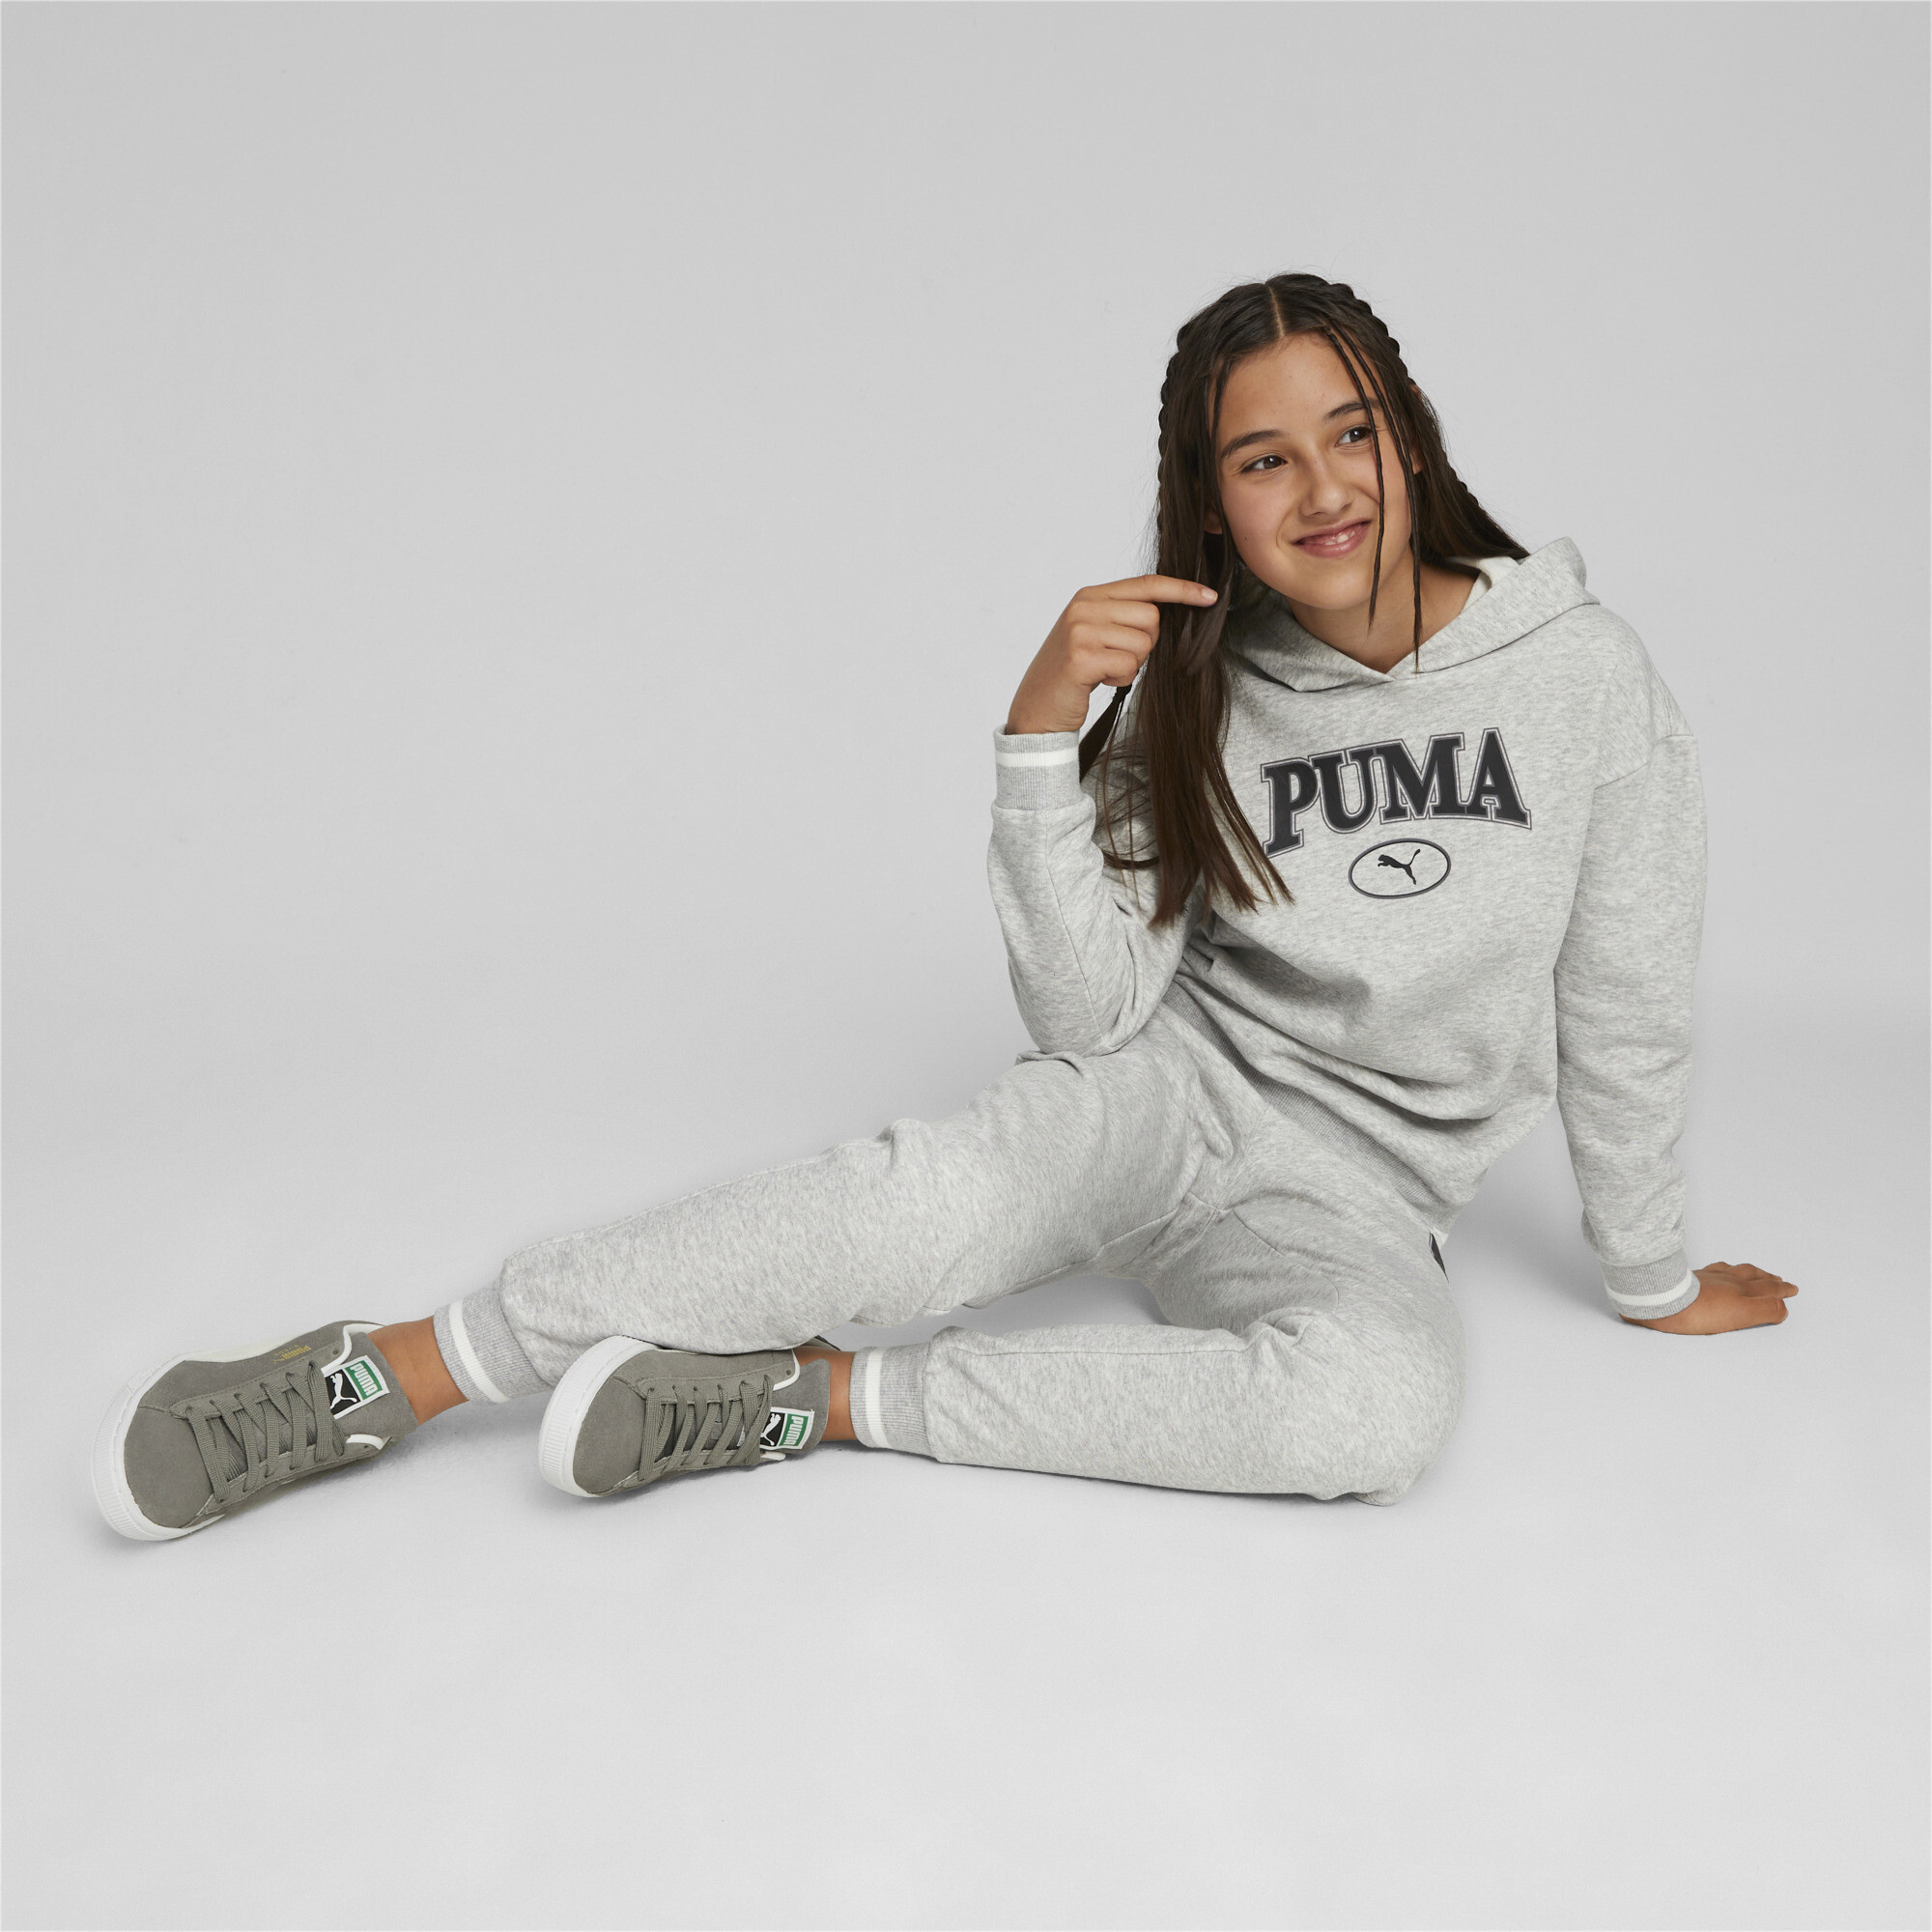 PUMA SQUAD Sweatpants In Heather, Size 9-10 Youth